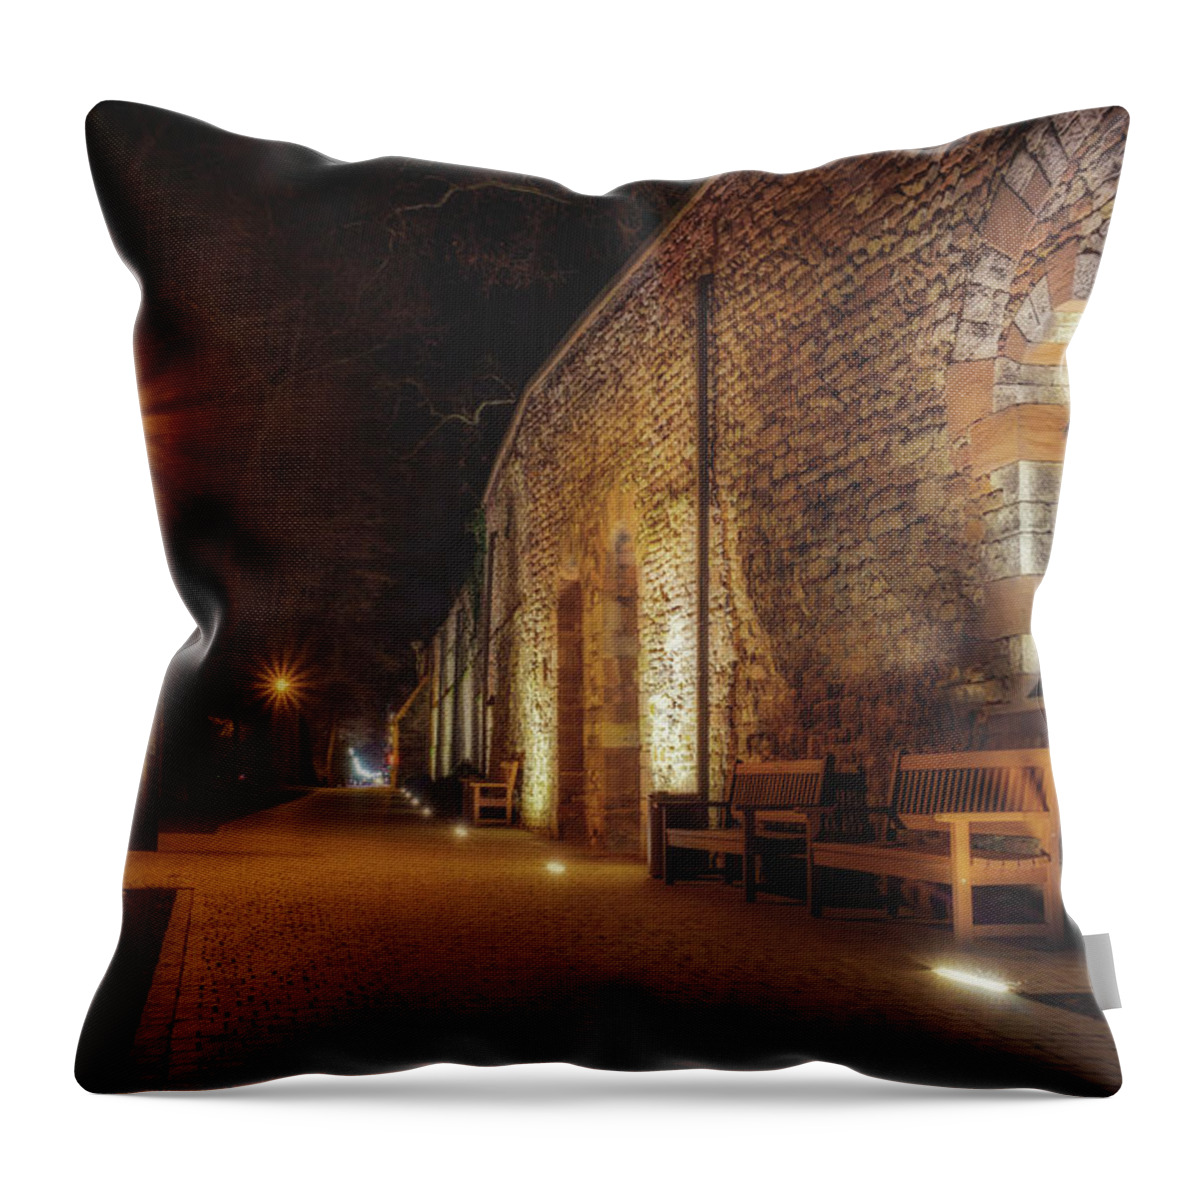 Worms Throw Pillow featuring the photograph The Wall by Marc Braner